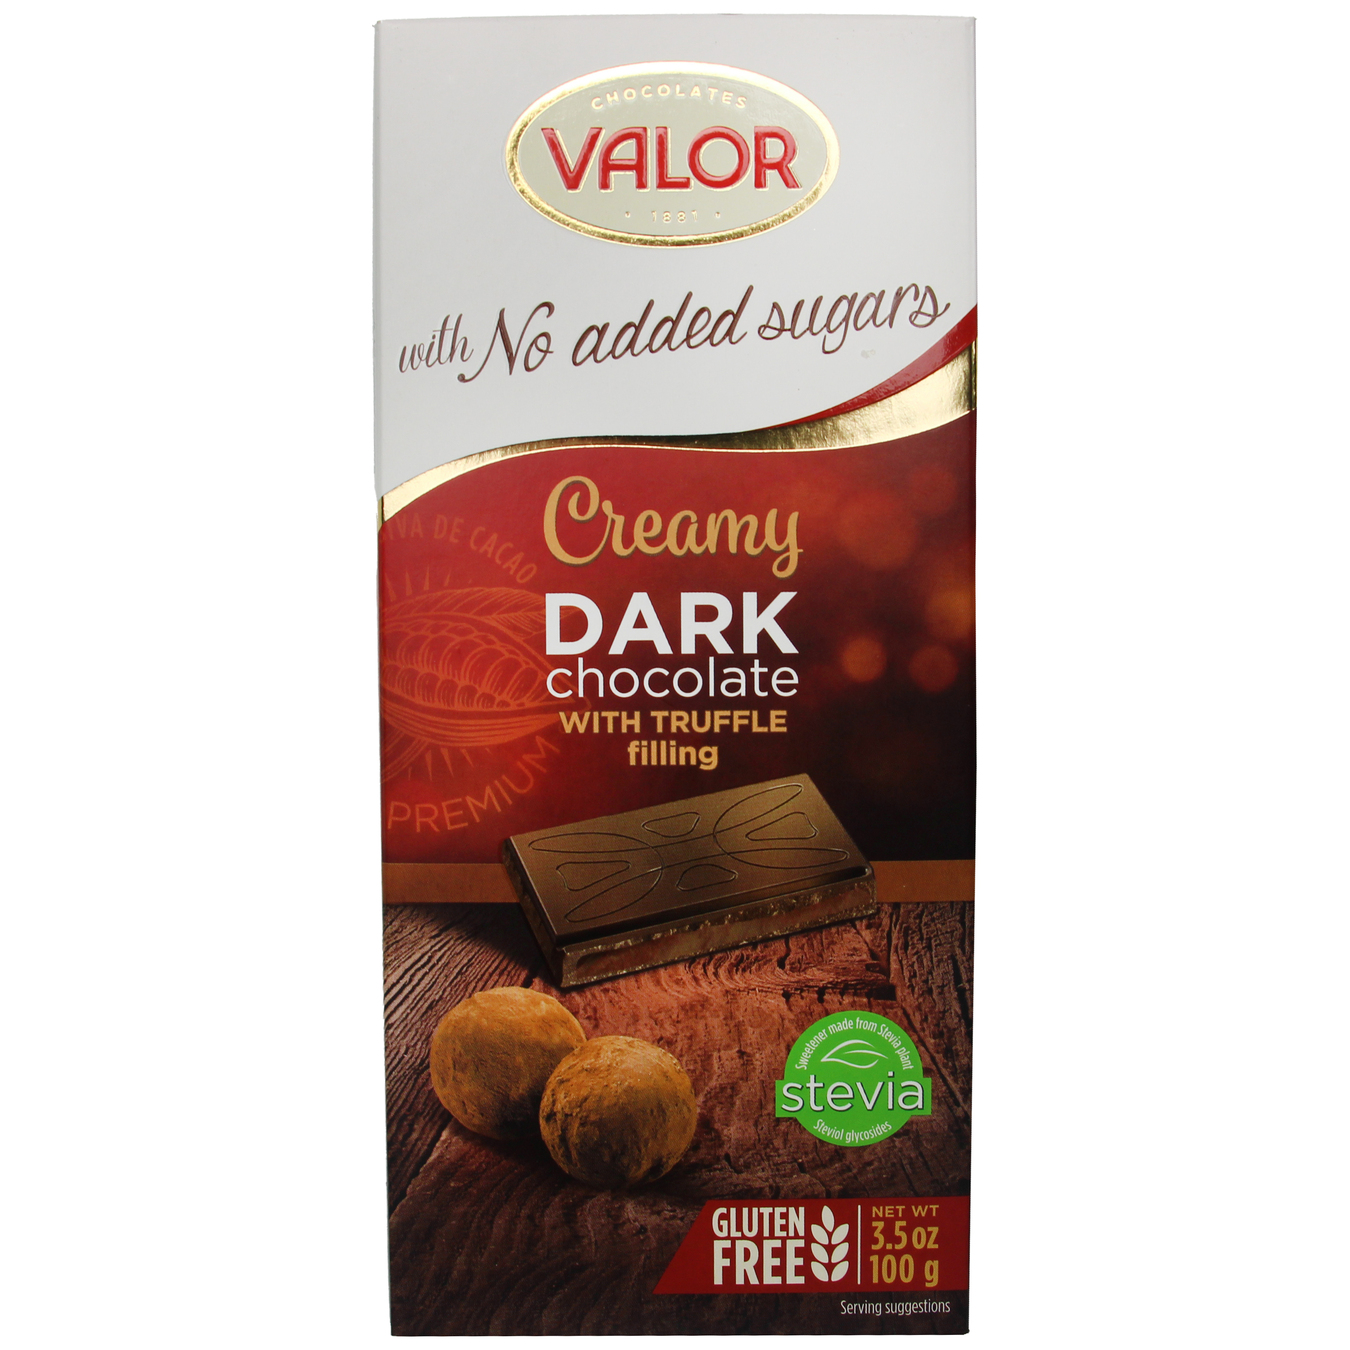 Black Chocolate Valor with Truffle Filling Sugar-Free 100g